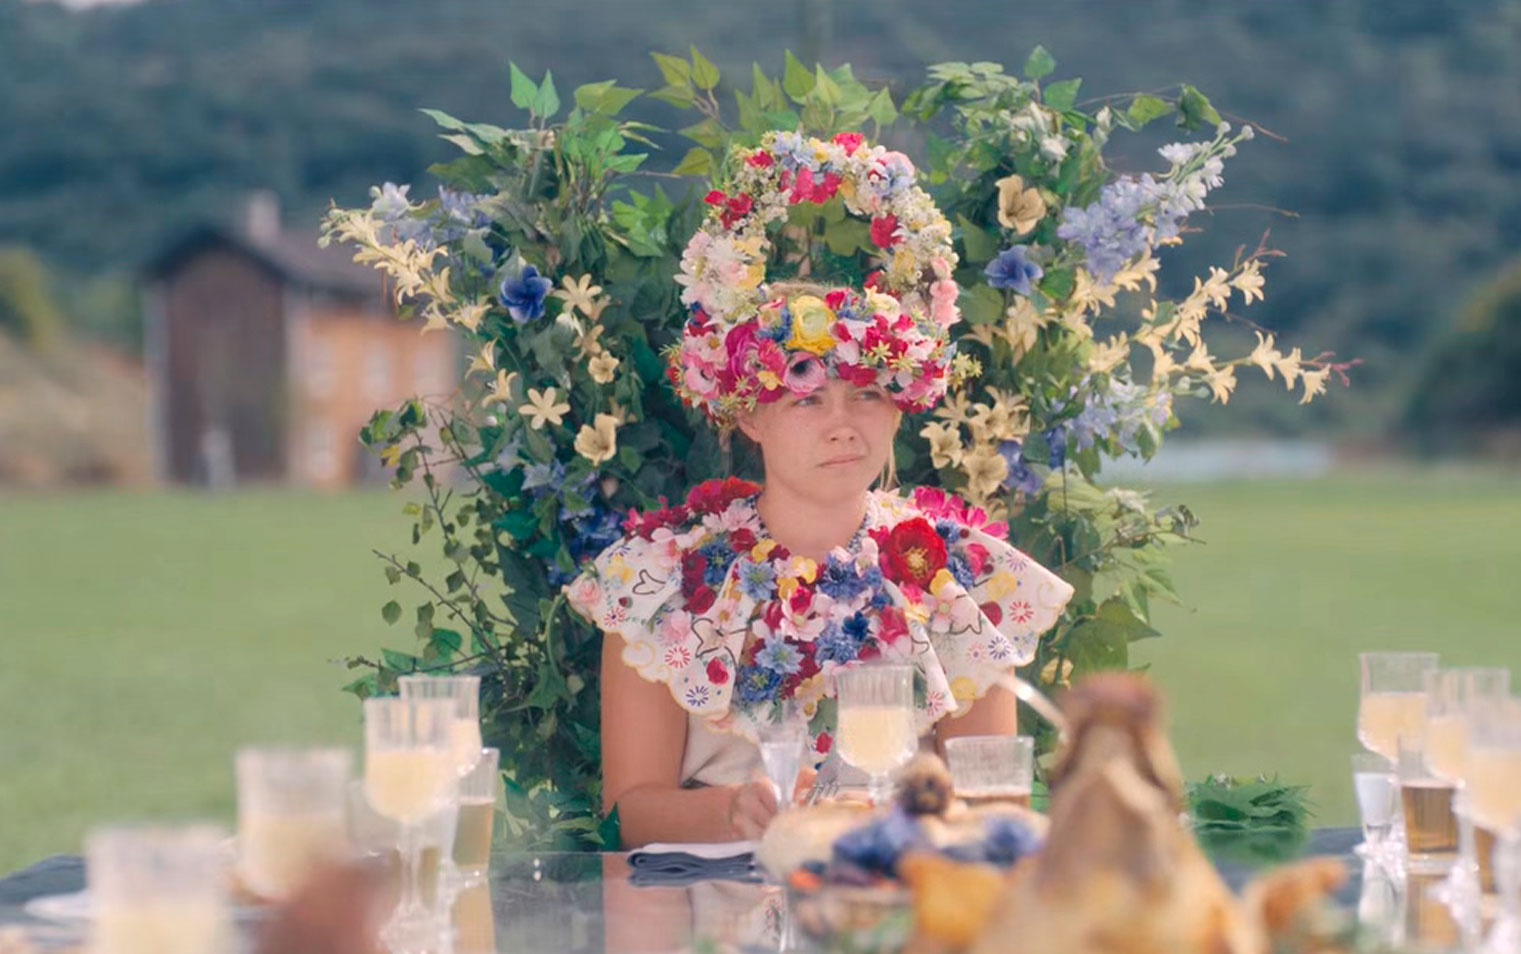 Film still from the 2019 movie "Midsommar" from A24